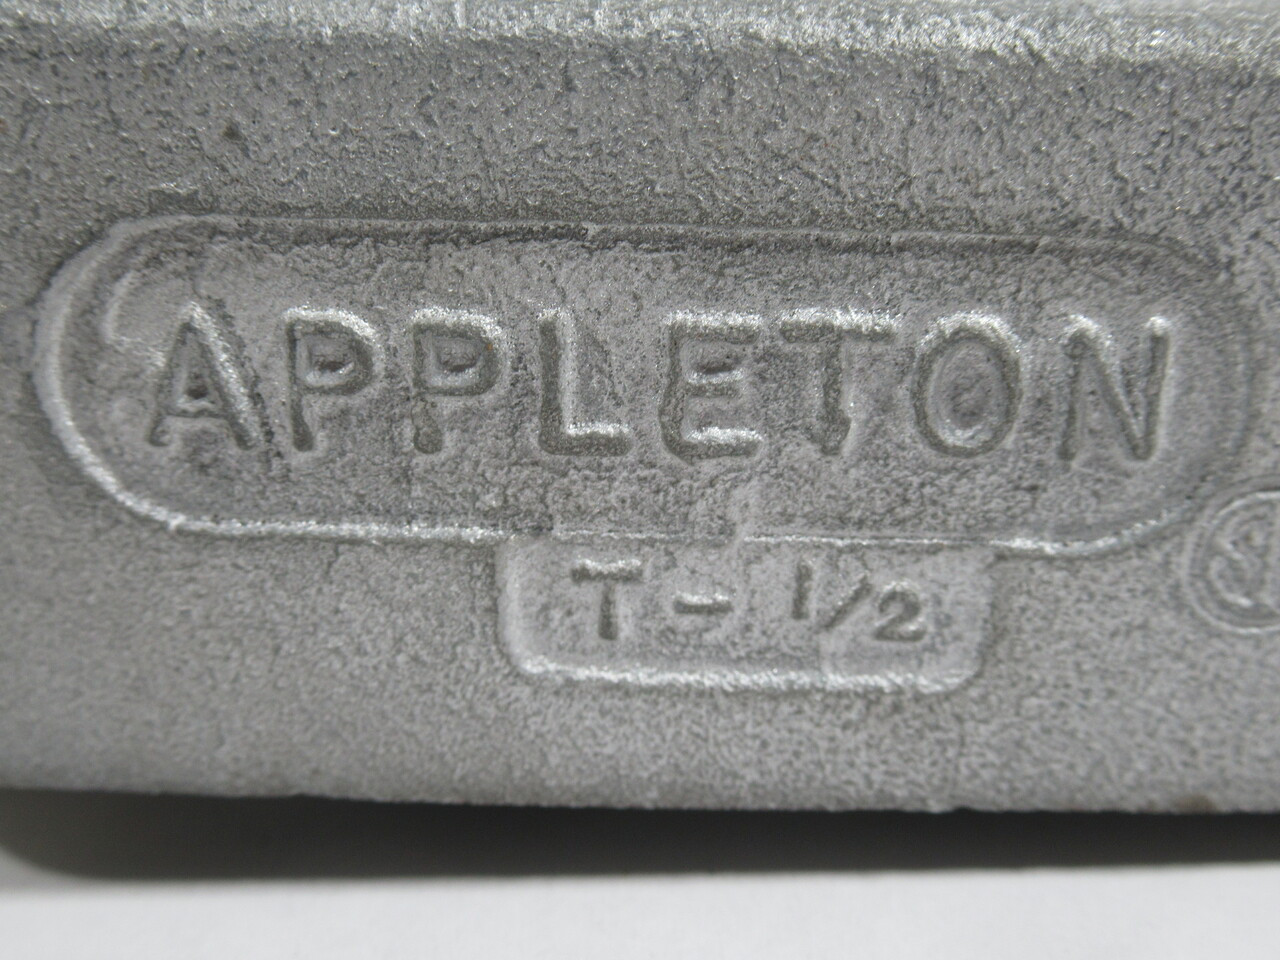 Appleton T-1/2 Threaded Conduit w/ Cover 1/2" USED